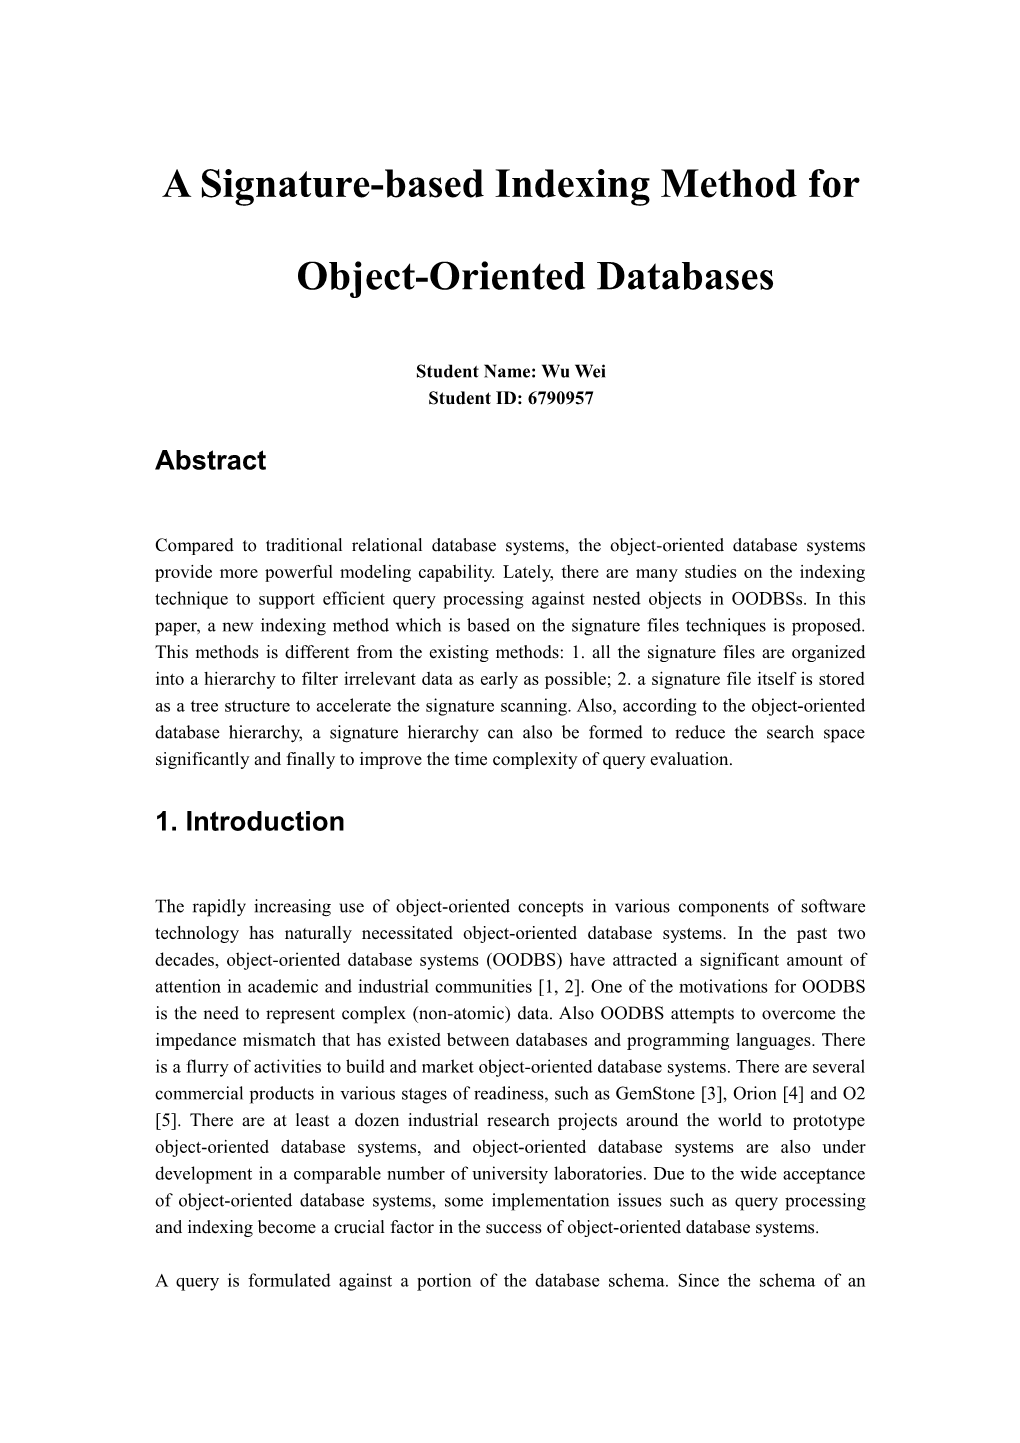 A Signature-Based Indexing Method for Object-Oriented Databases